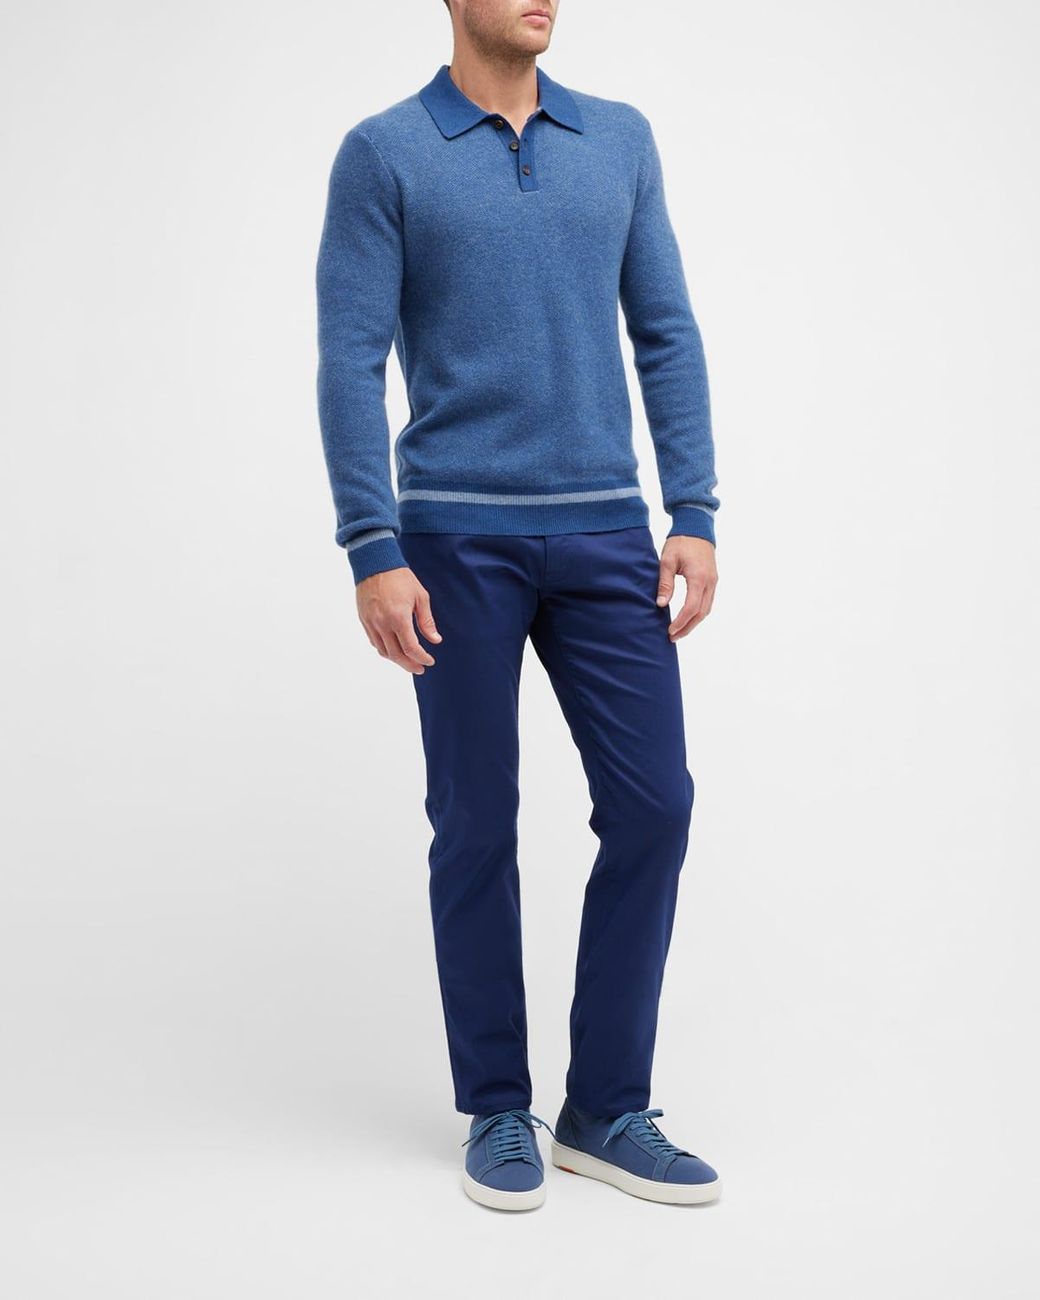 Permanent Mount Bank Indsigt Neiman Marcus Cashmere Birdseye Polo Shirt in Blue for Men | Lyst